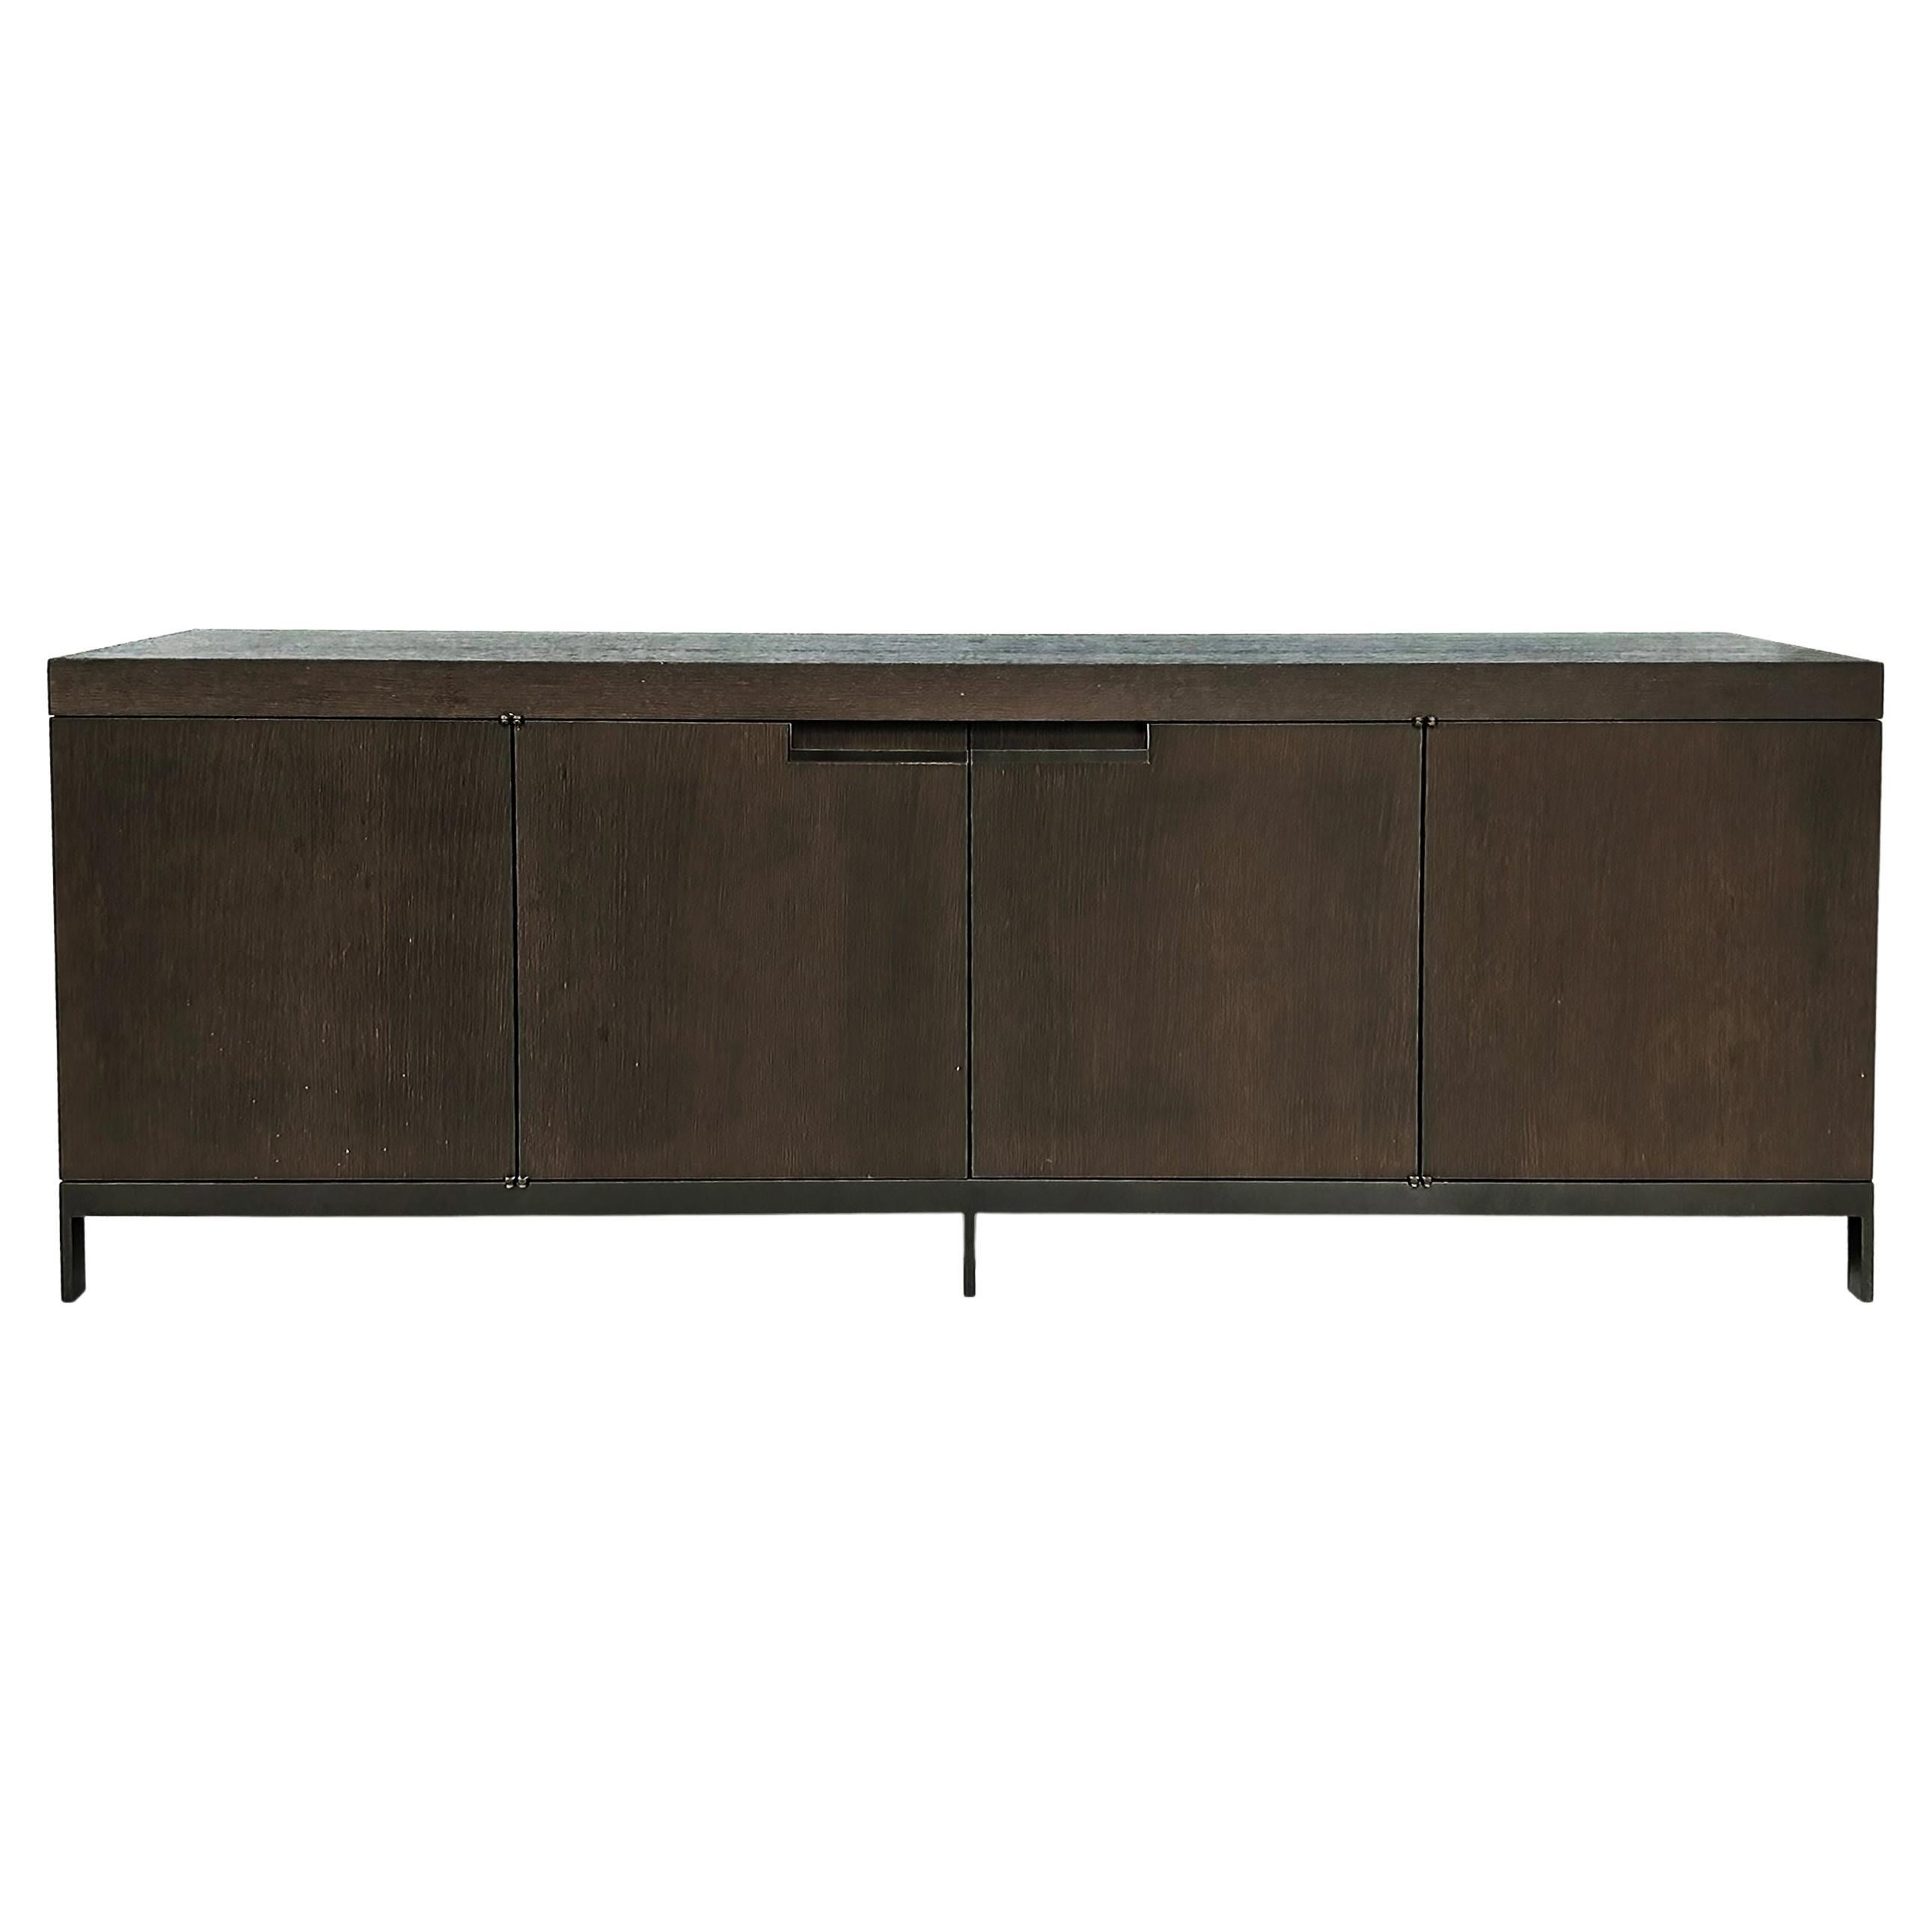 Christian Liaigre Tangris Credenza Cabinet, Sandblasted Oak and Metal